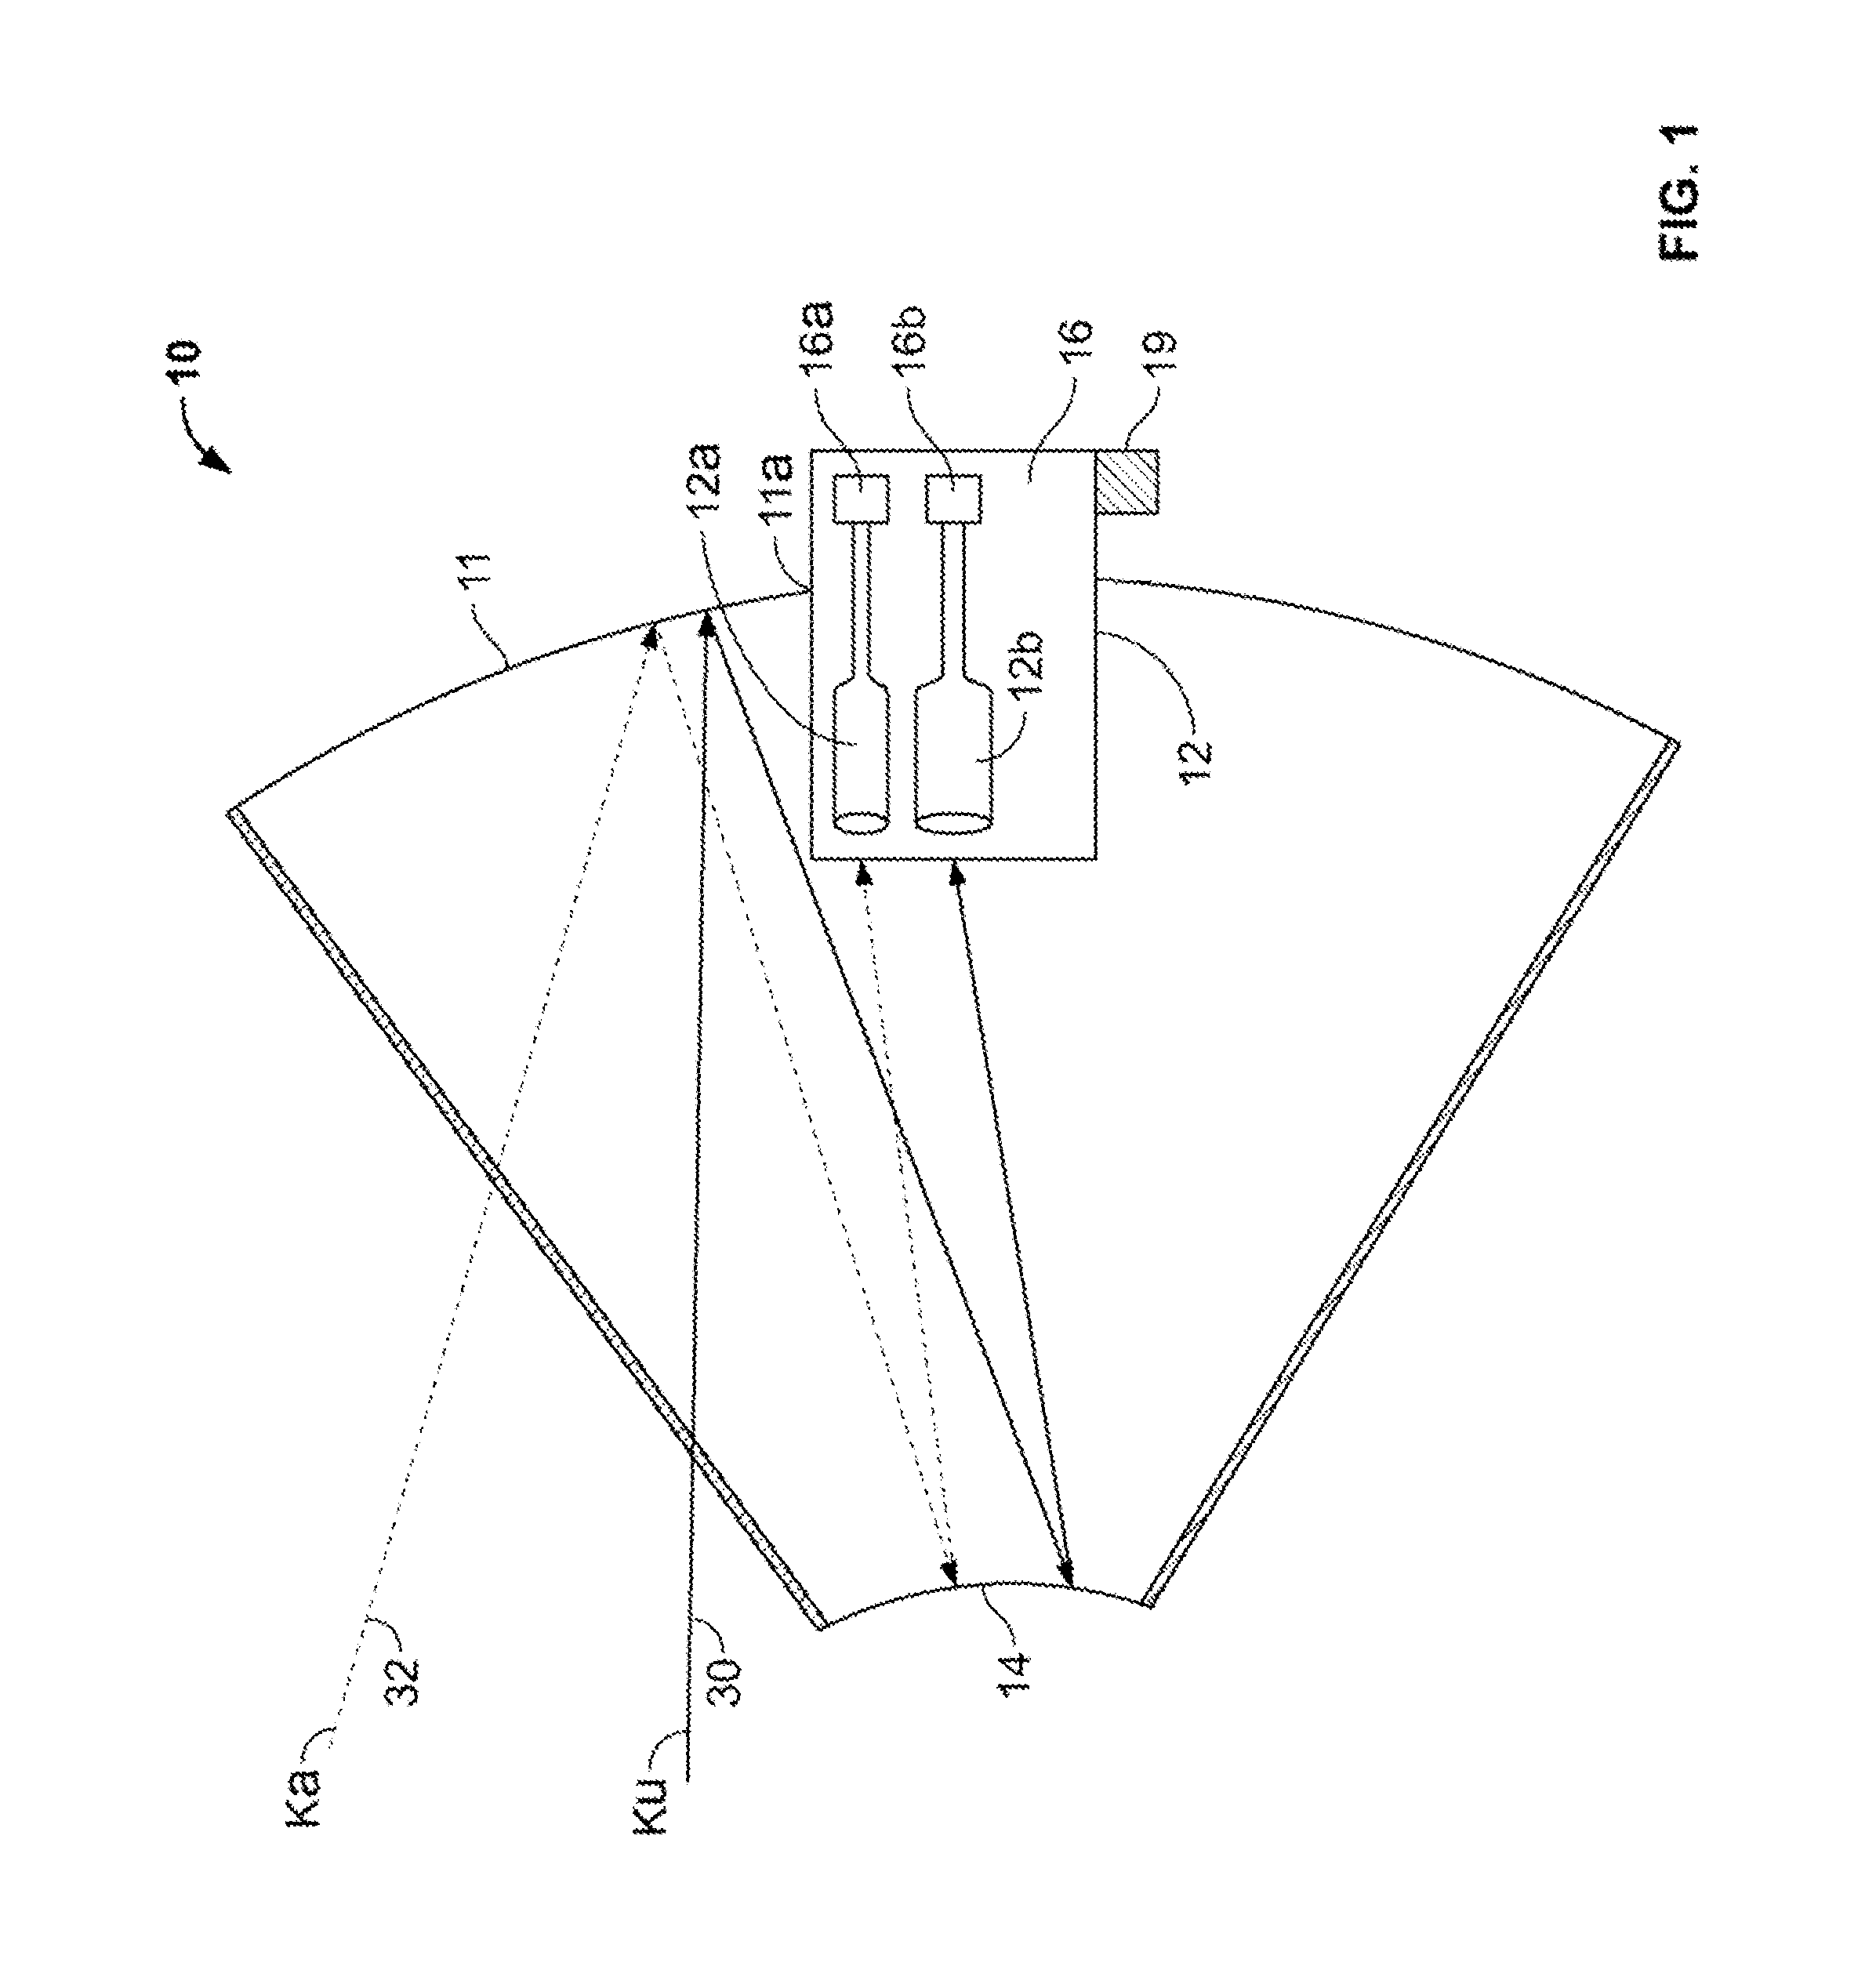 Multi-band antenna system for satellite communications